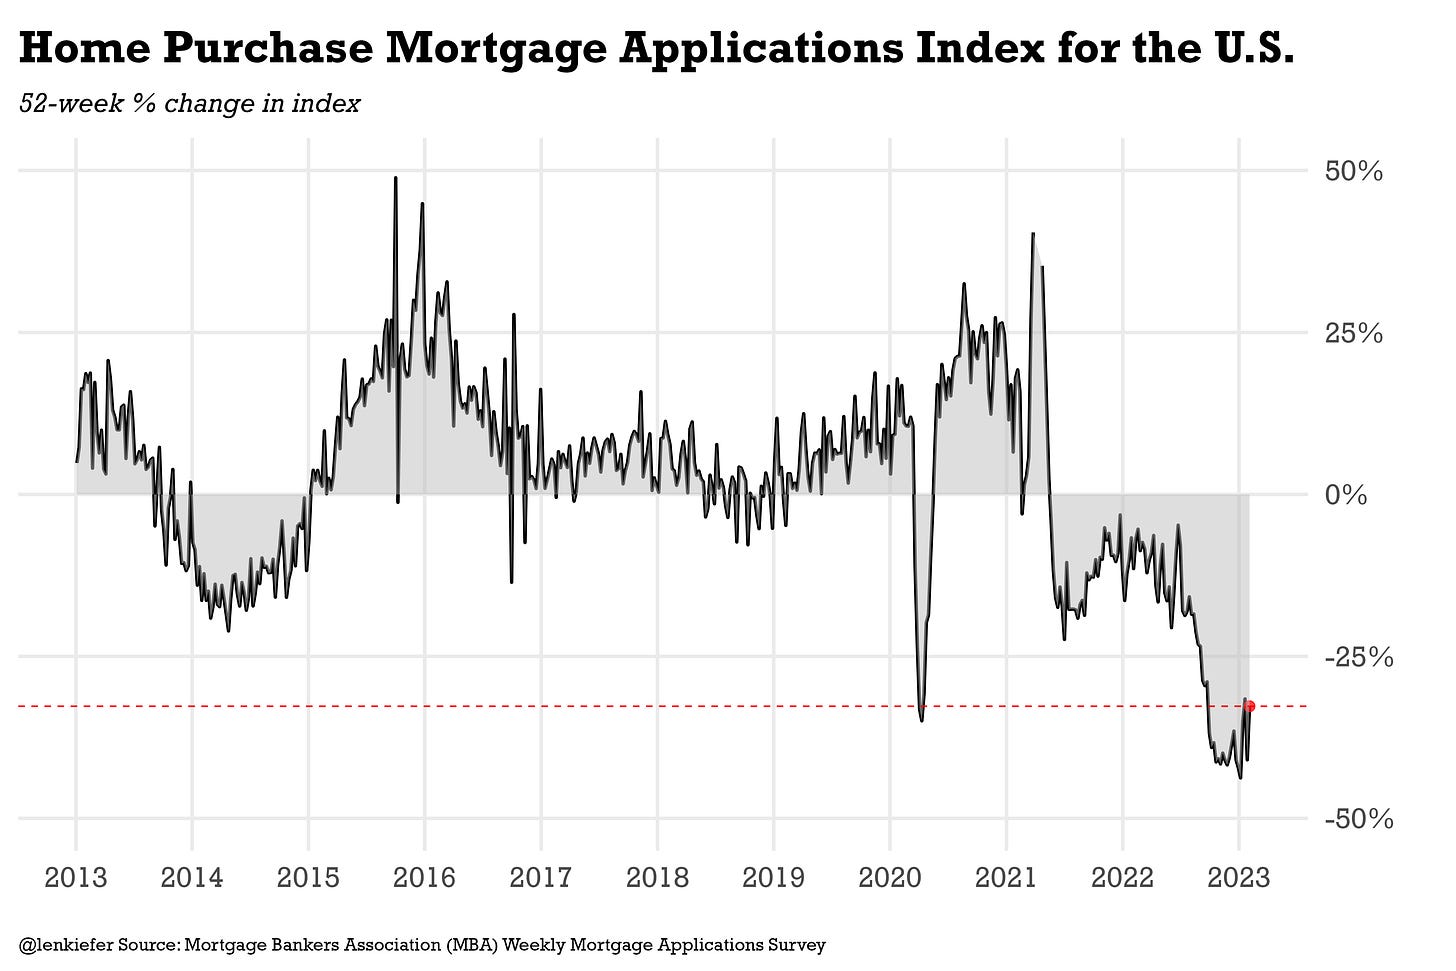 time series chart of 52-week % change in U.S. home purchase mortgage applications index from MBA